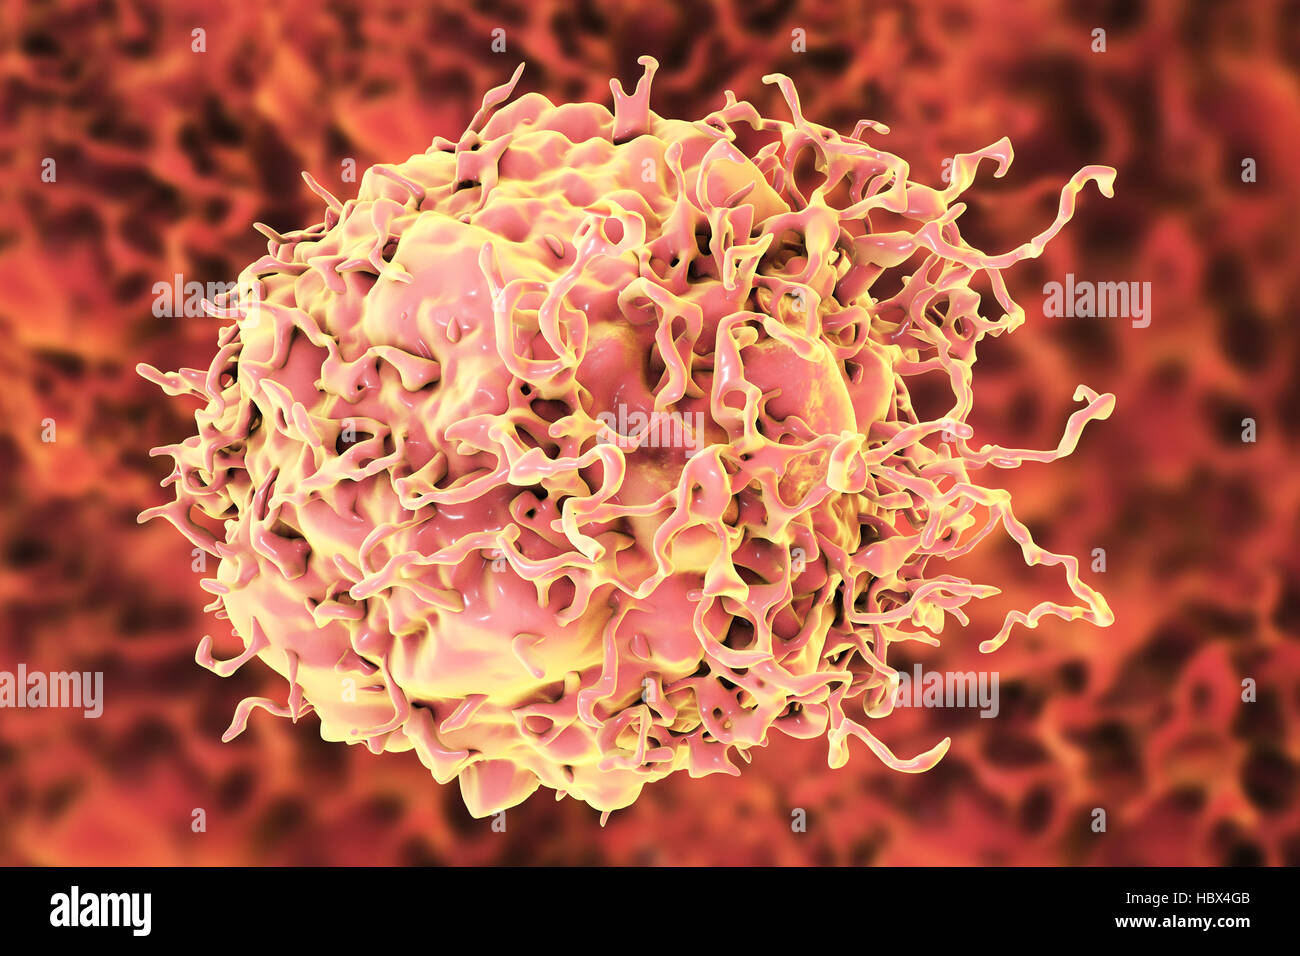 Colon cancer cell, computer illustration. Stock Photo